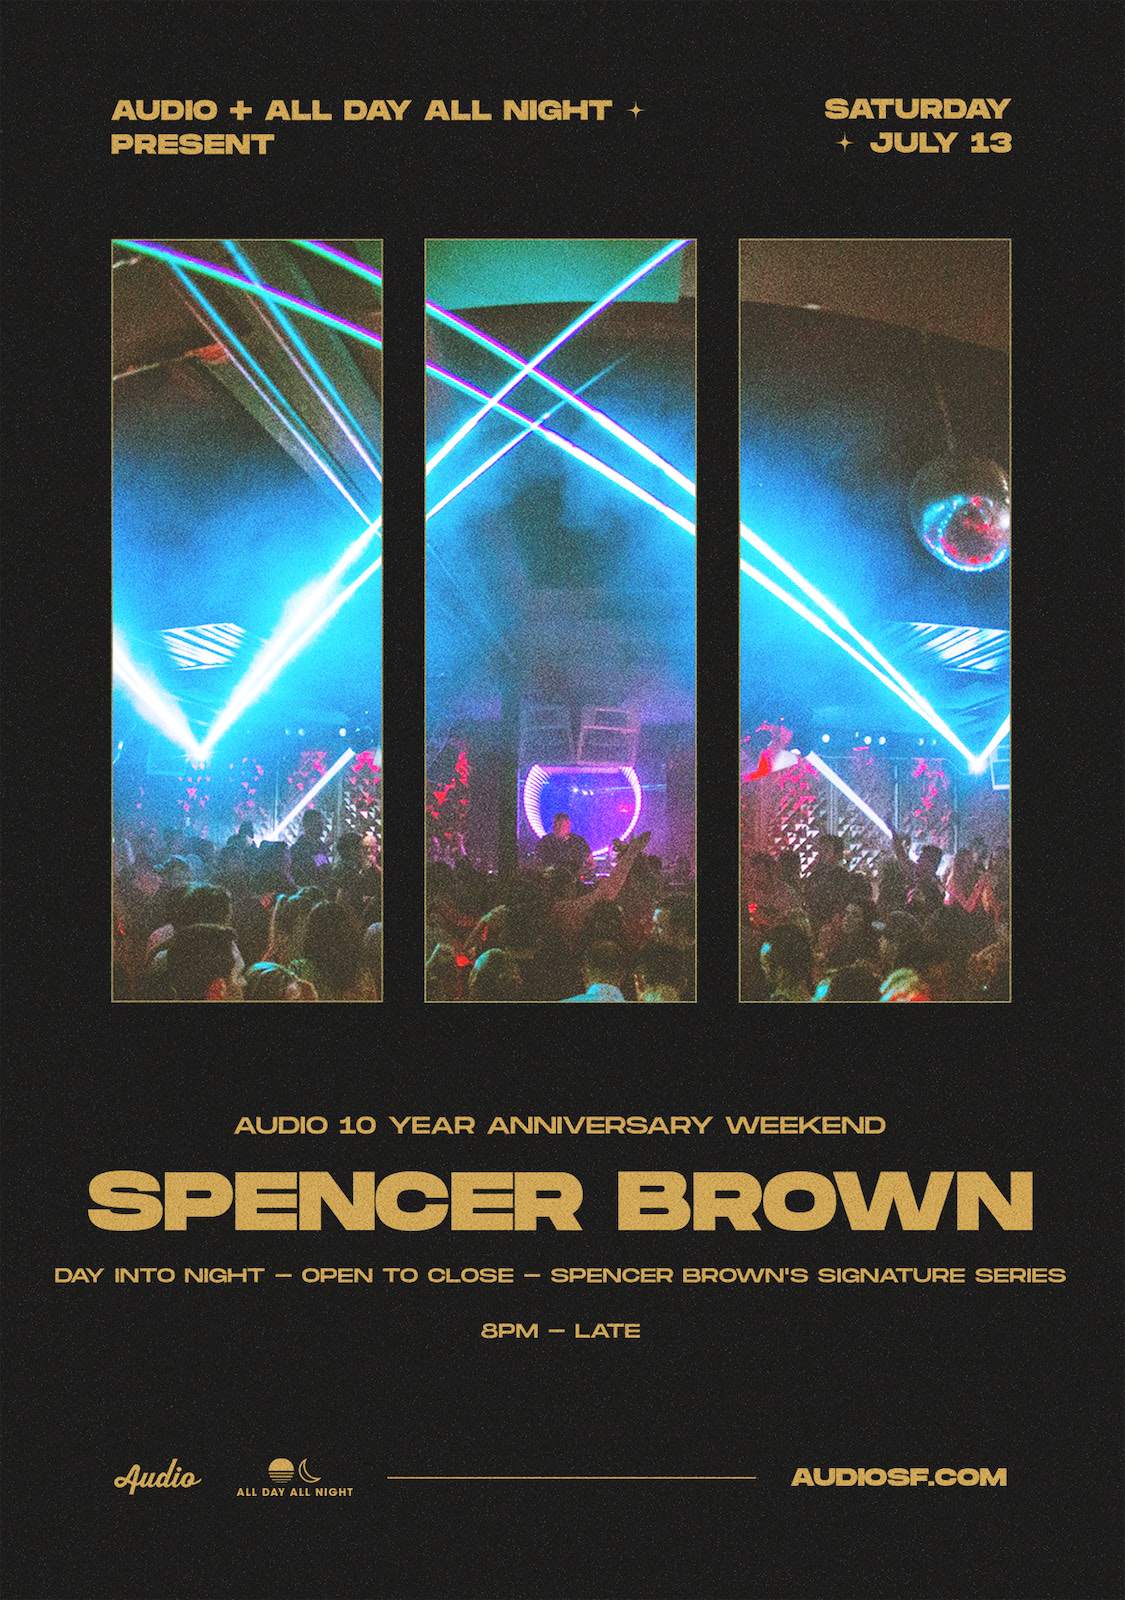 Spencer Brown (DAY INTO NIGHT - OPEN TO CLOSE SET) - Página frontal